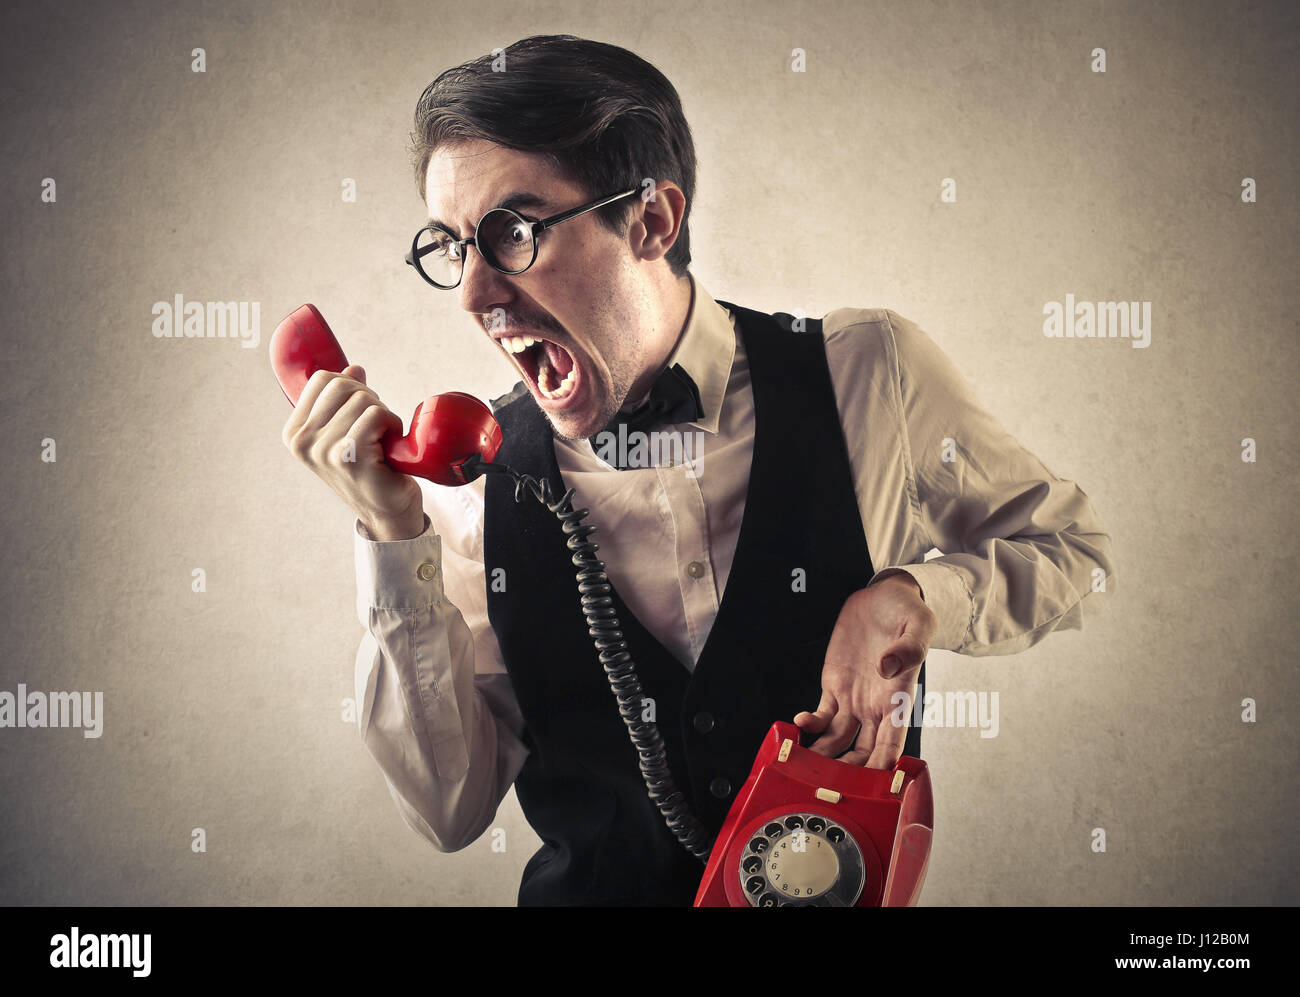 Man yelling with red retro phone Stock Photo